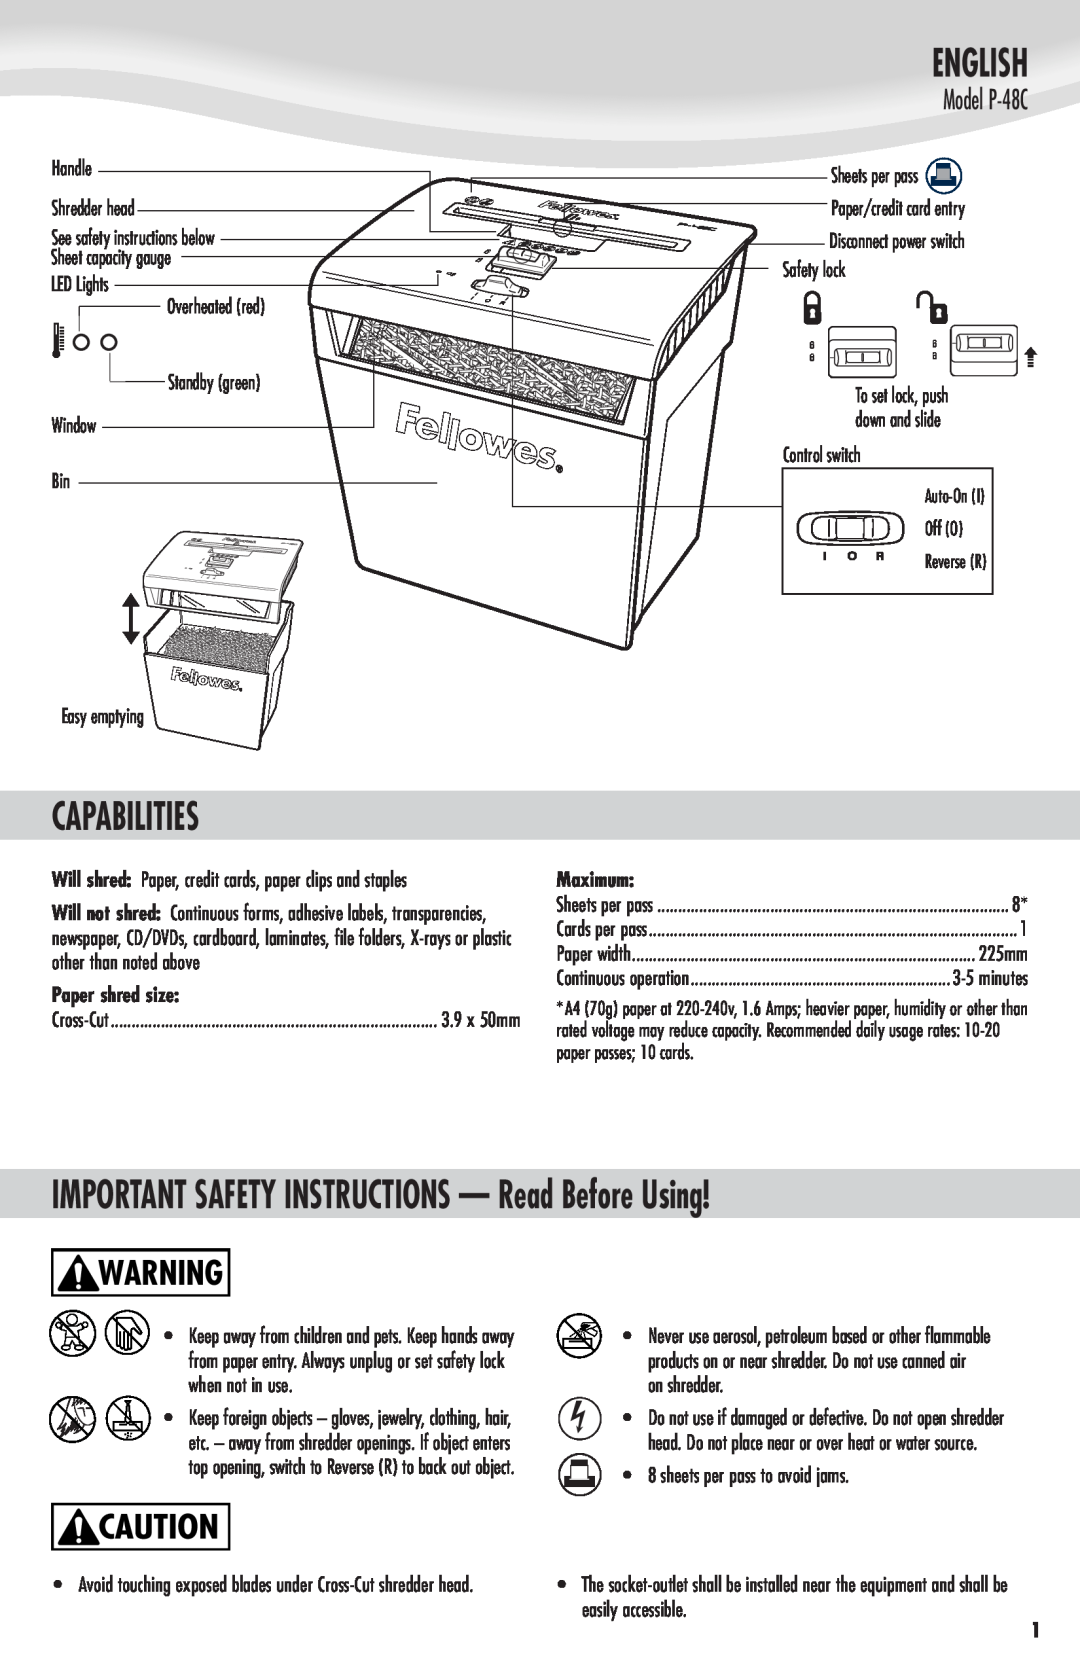 Fellowes English, Capabilities, IMPORTANT SAFETY INSTRUCTIONS - Read Before Using, Model P-48C, Handle Shredder head 